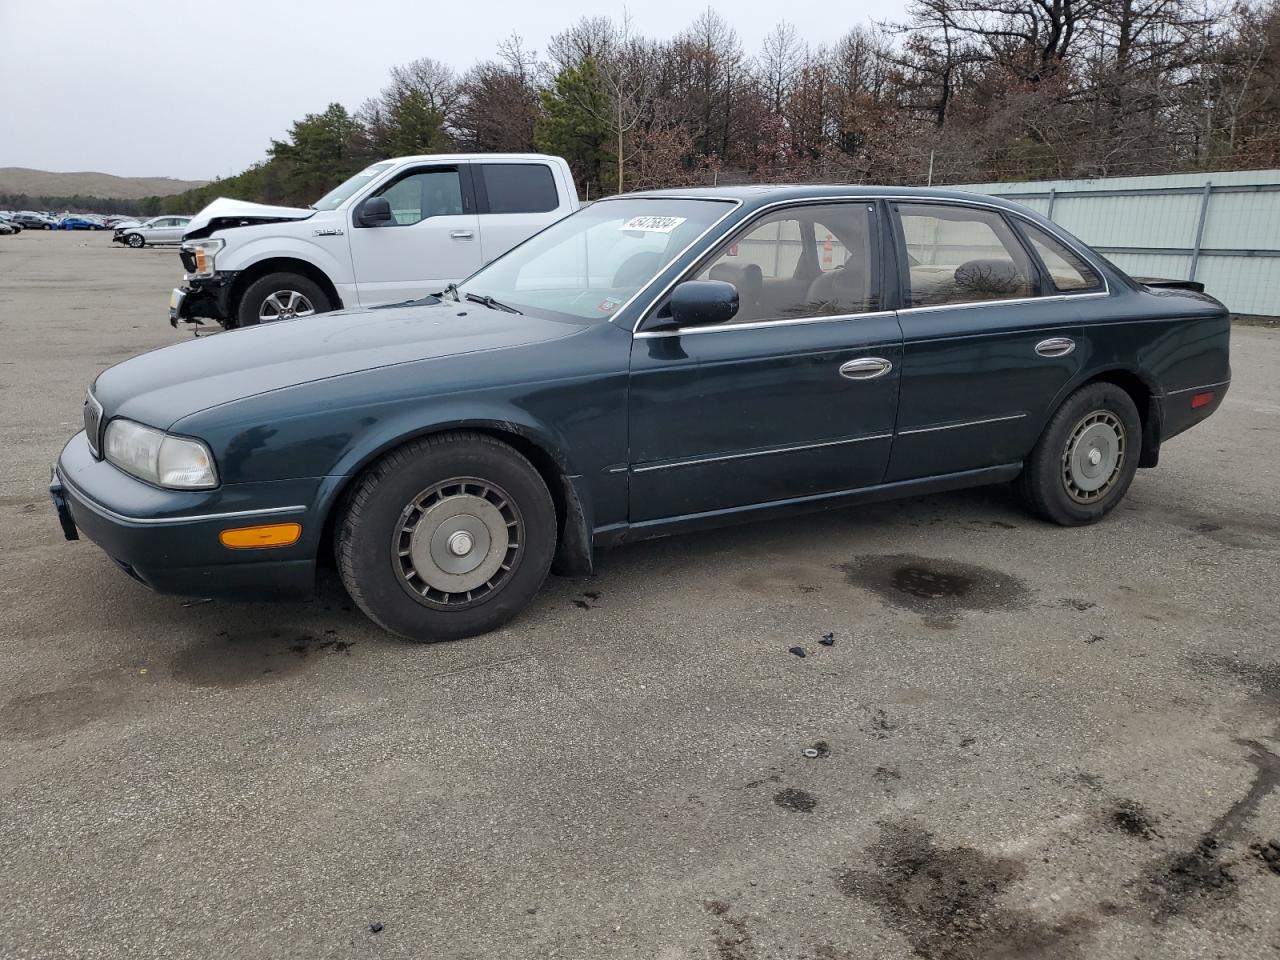 vin: JNKNG01D9RM261764 JNKNG01D9RM261764 1994 infiniti q45 4500 for Sale in 11719 9203, Ny - Long Island, Brookhaven, USA